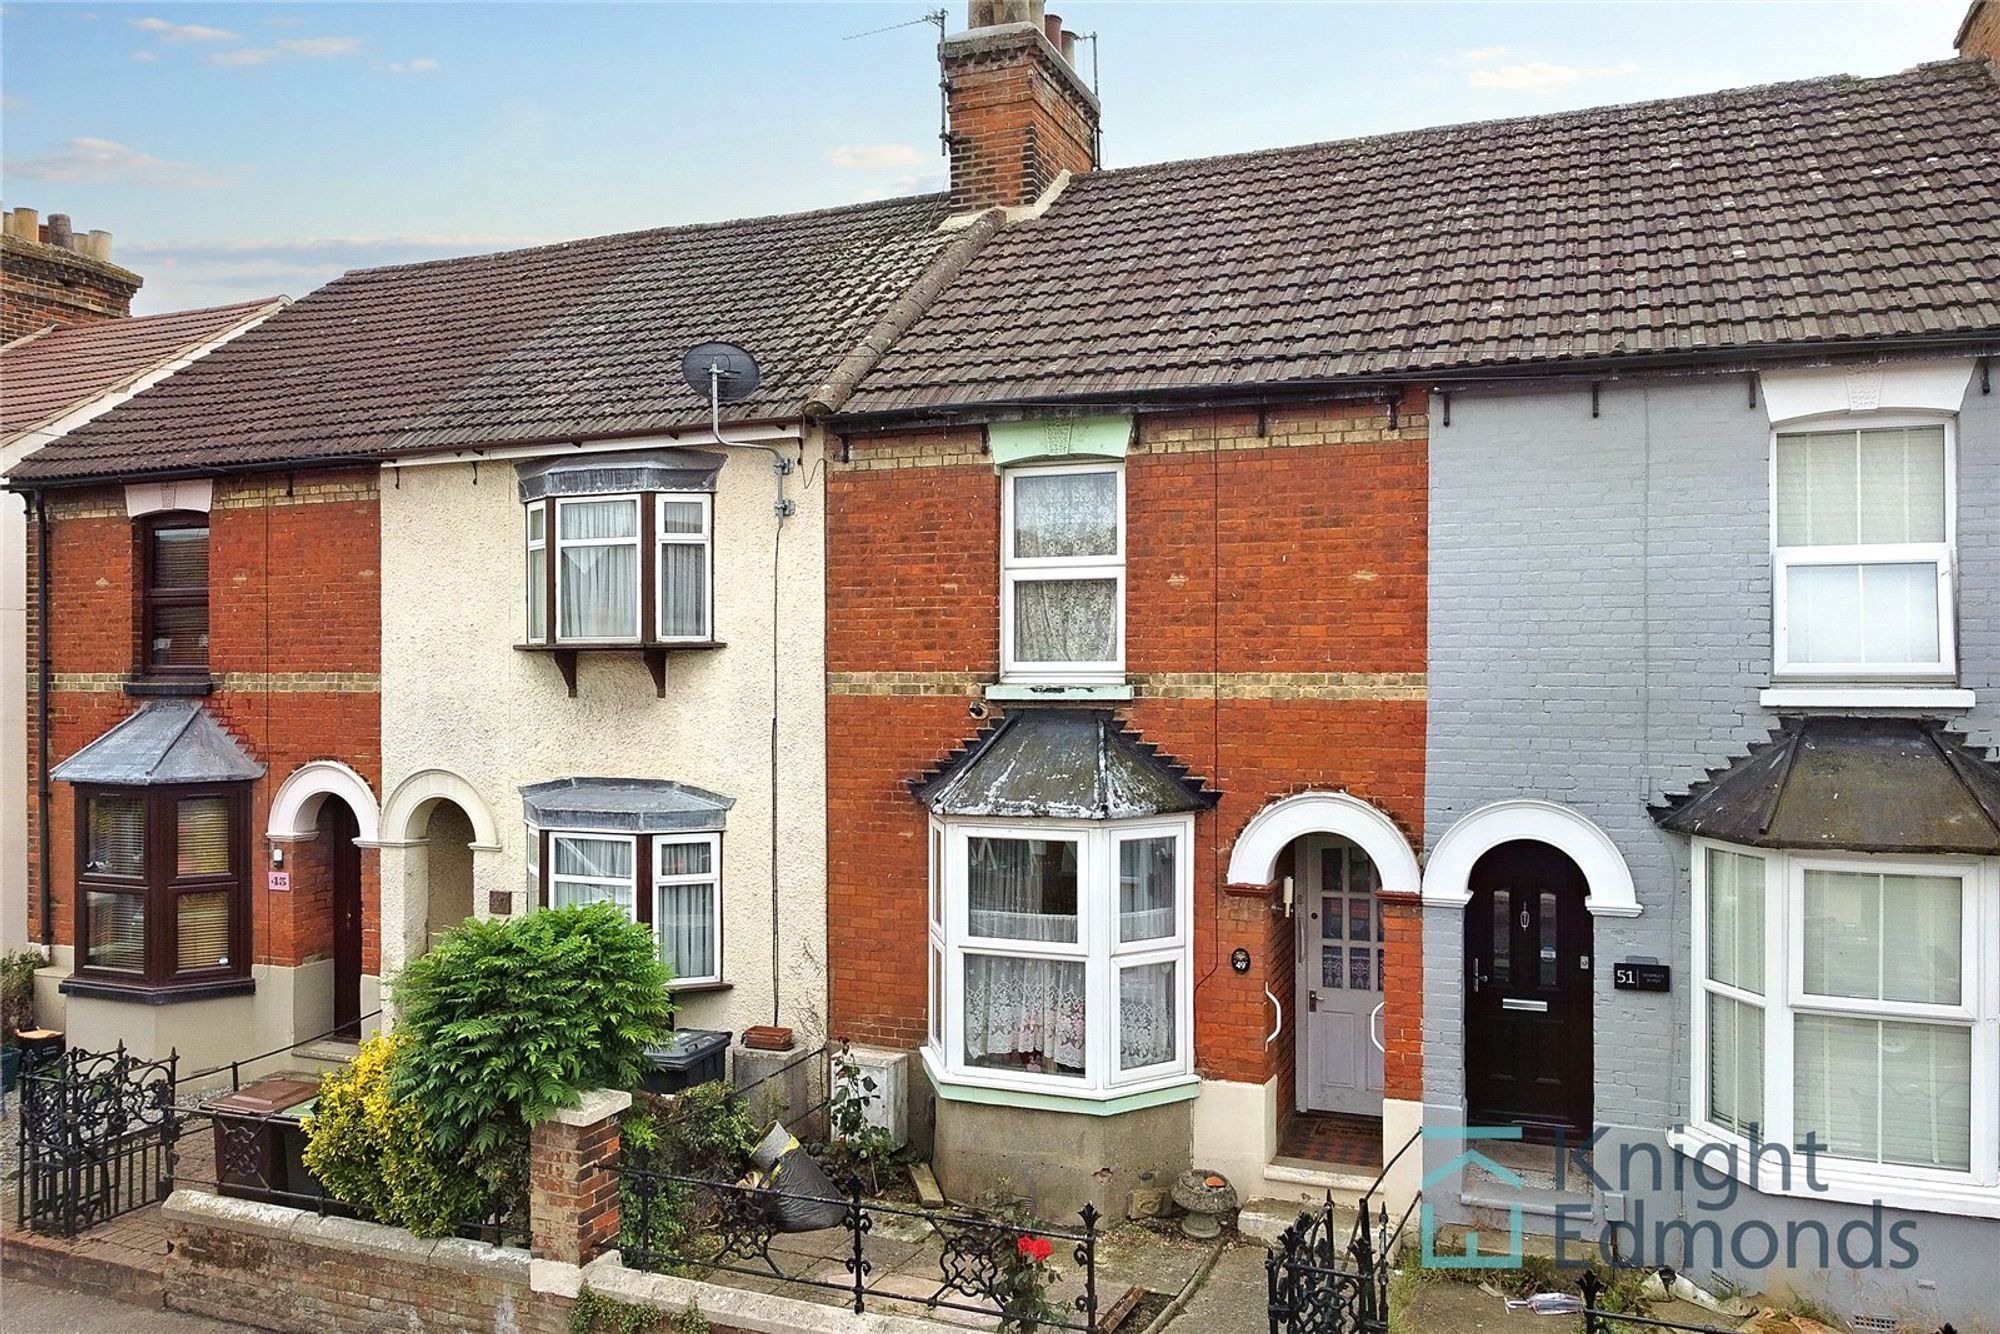 2 bed mid-terraced house for sale in Bramley Road, Snodland, ME6 